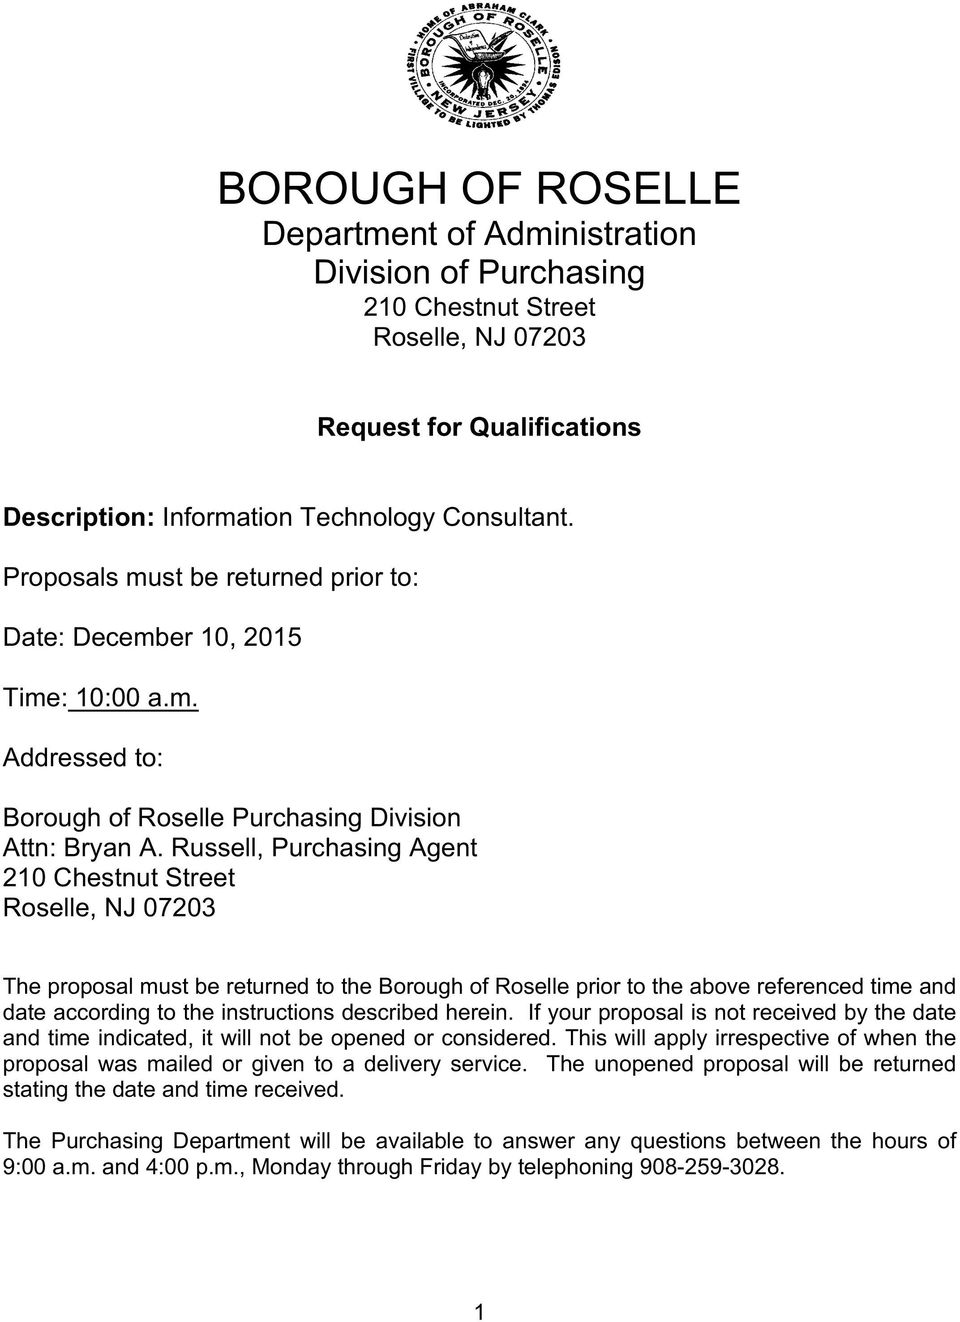 Russell, Purchasing Agent 210 Chestnut Street Roselle, NJ 07203 The proposal must be returned to the Borough of Roselle prior to the above referenced time and date according to the instructions